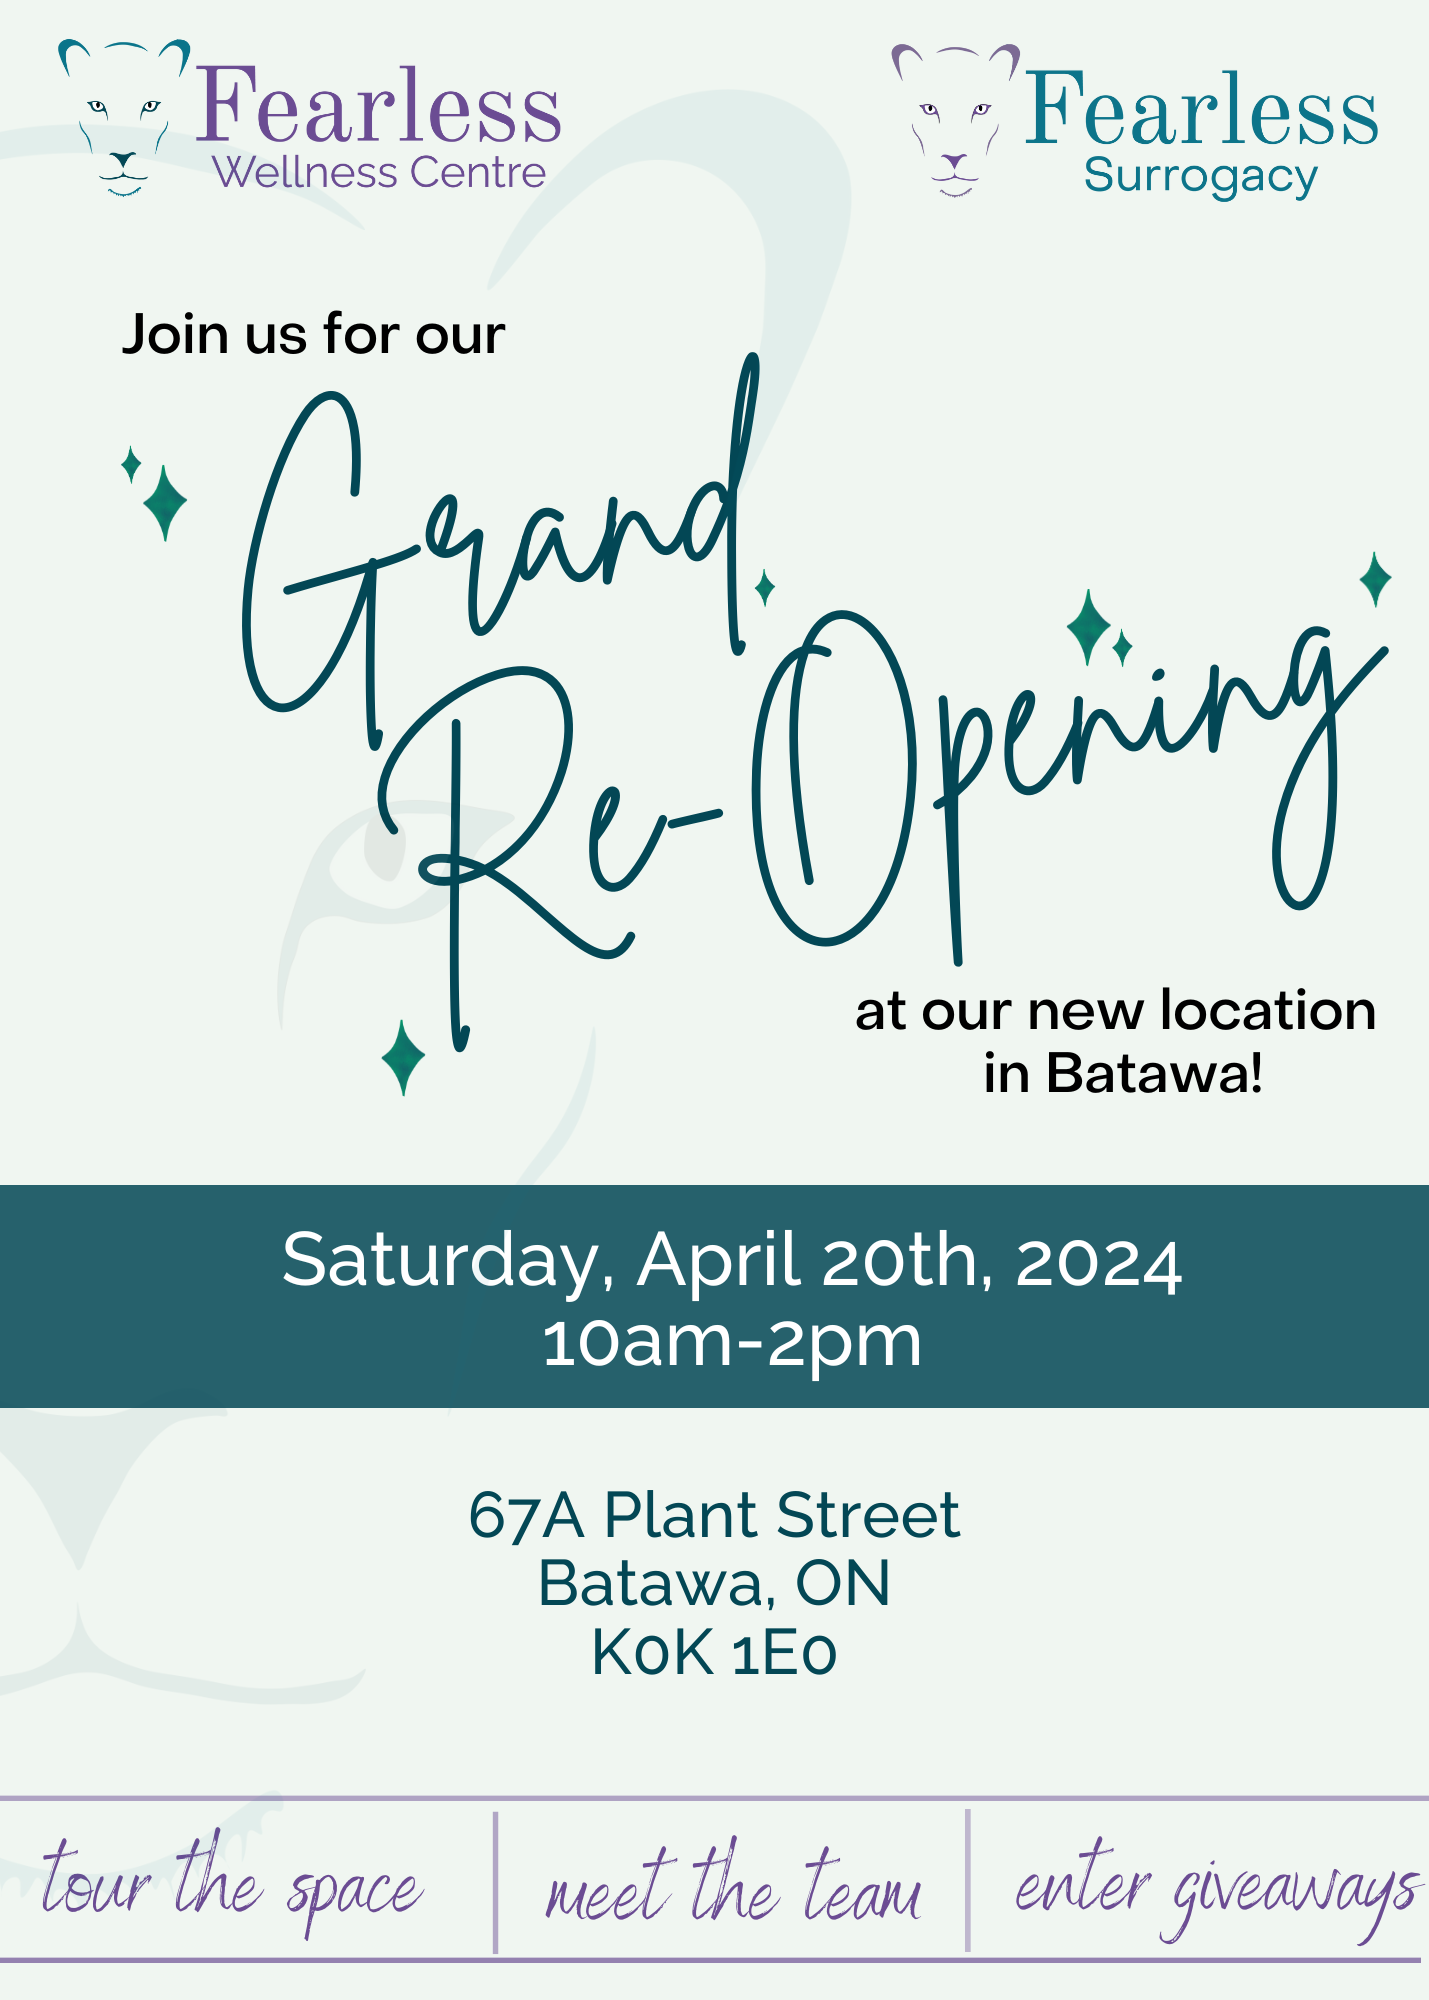 poster titled "Grand Re-opening" with event details.